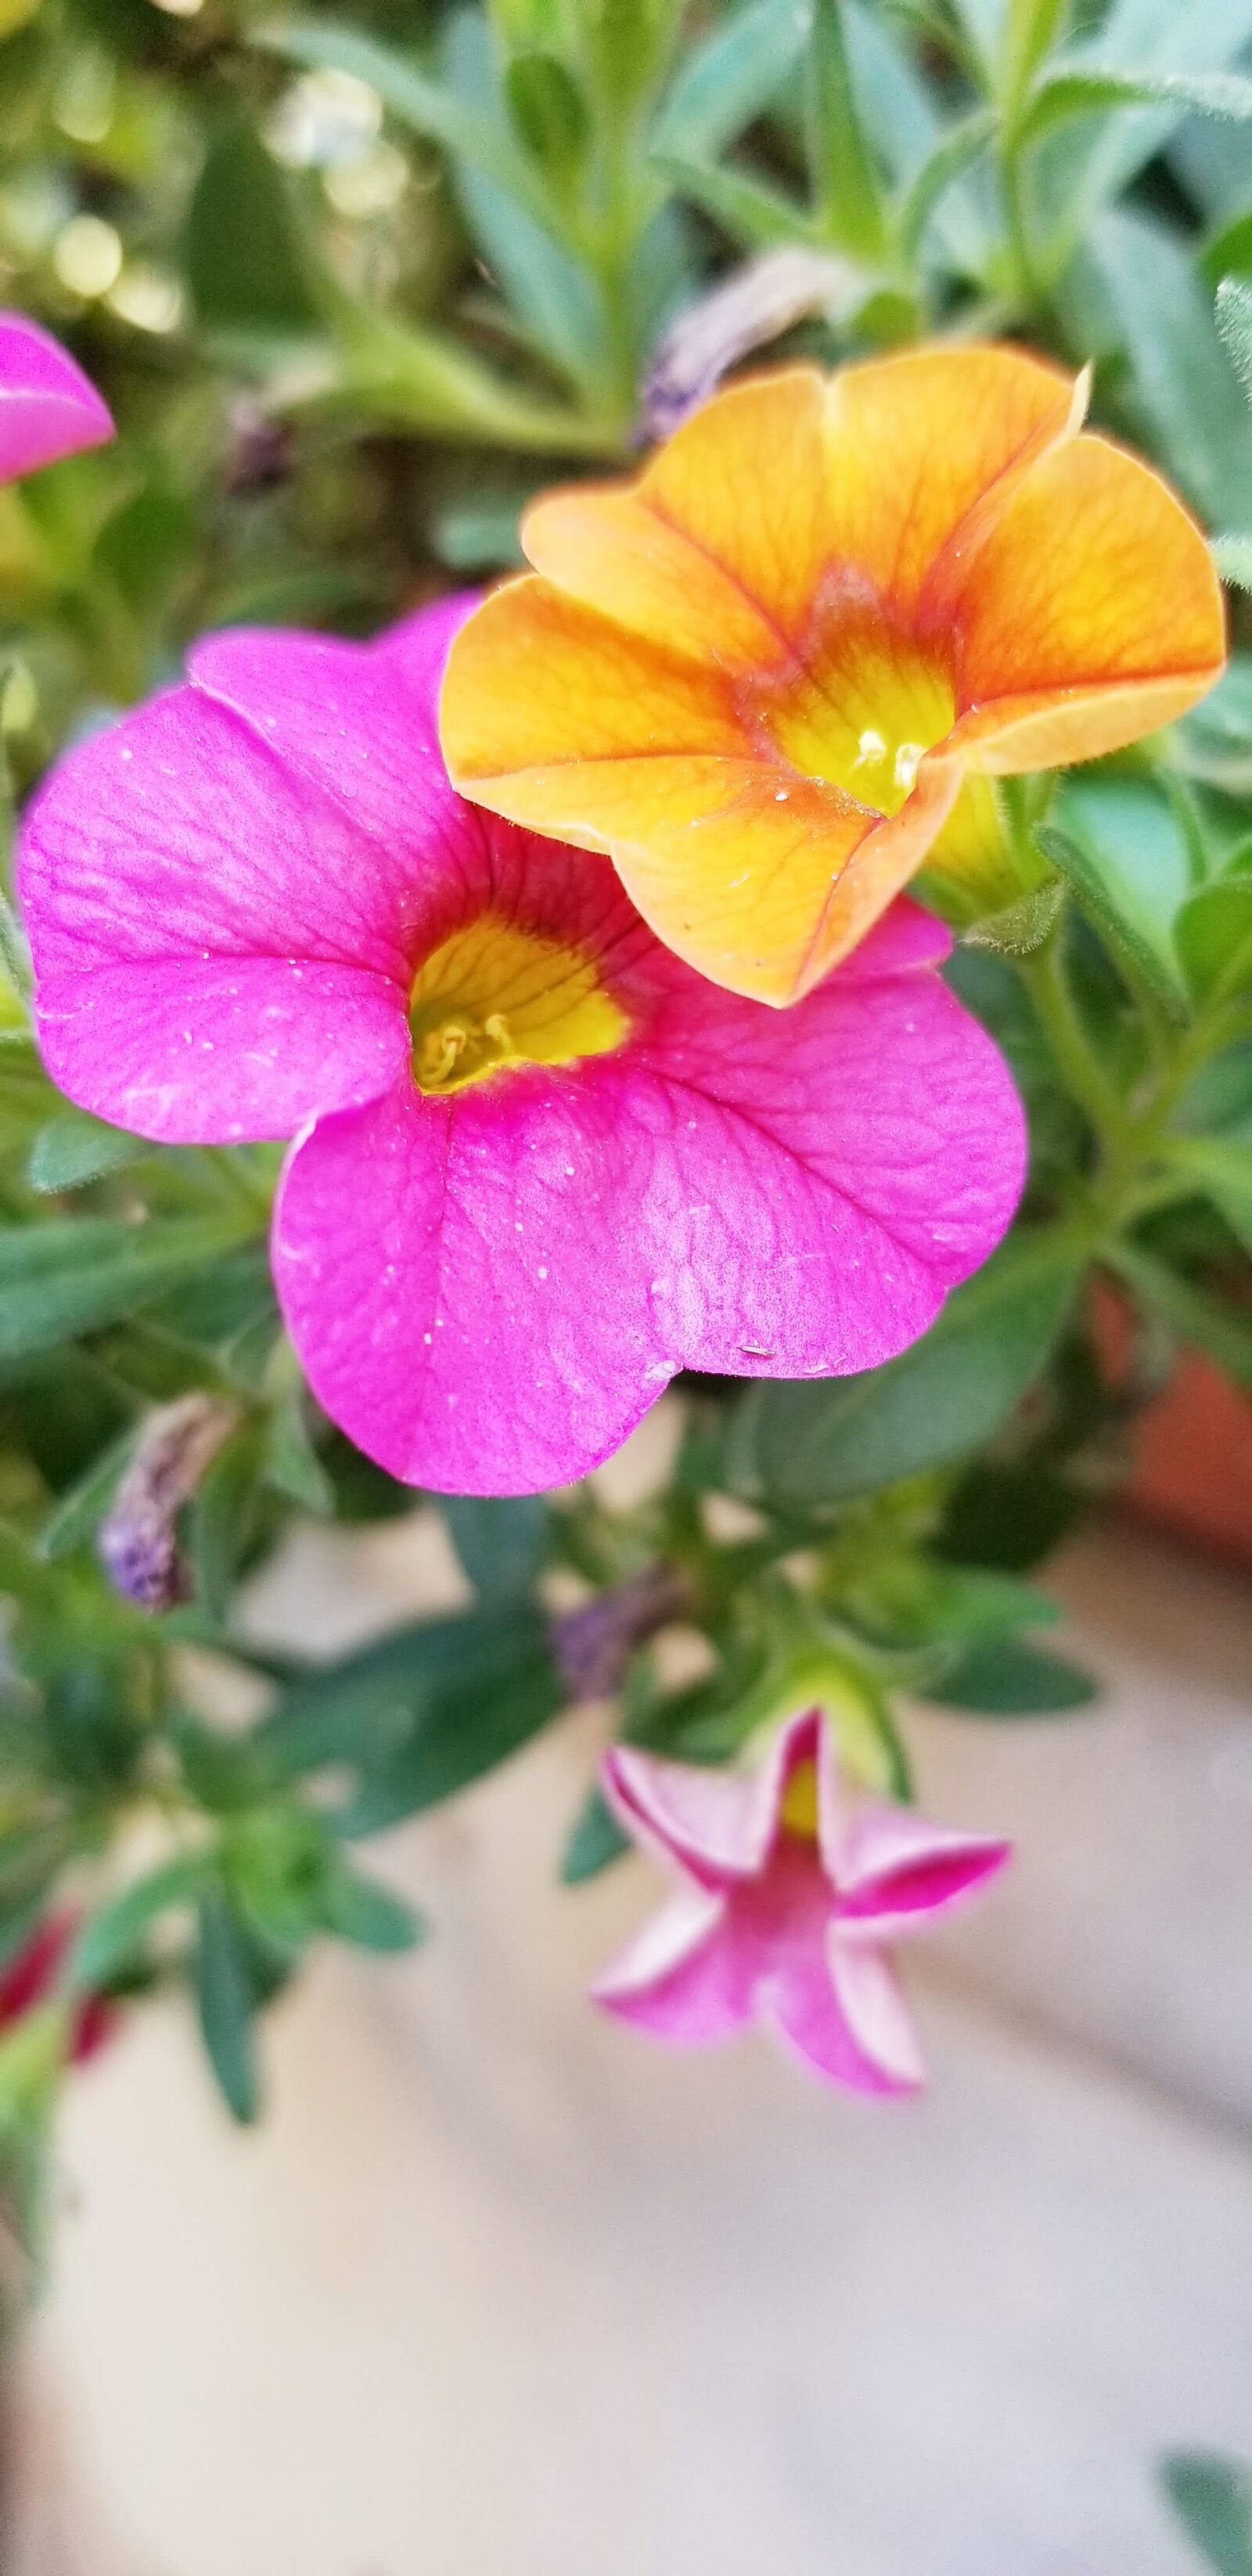 Samsung Galaxy S8 sample photo. Impatients, flowers, flower family photography